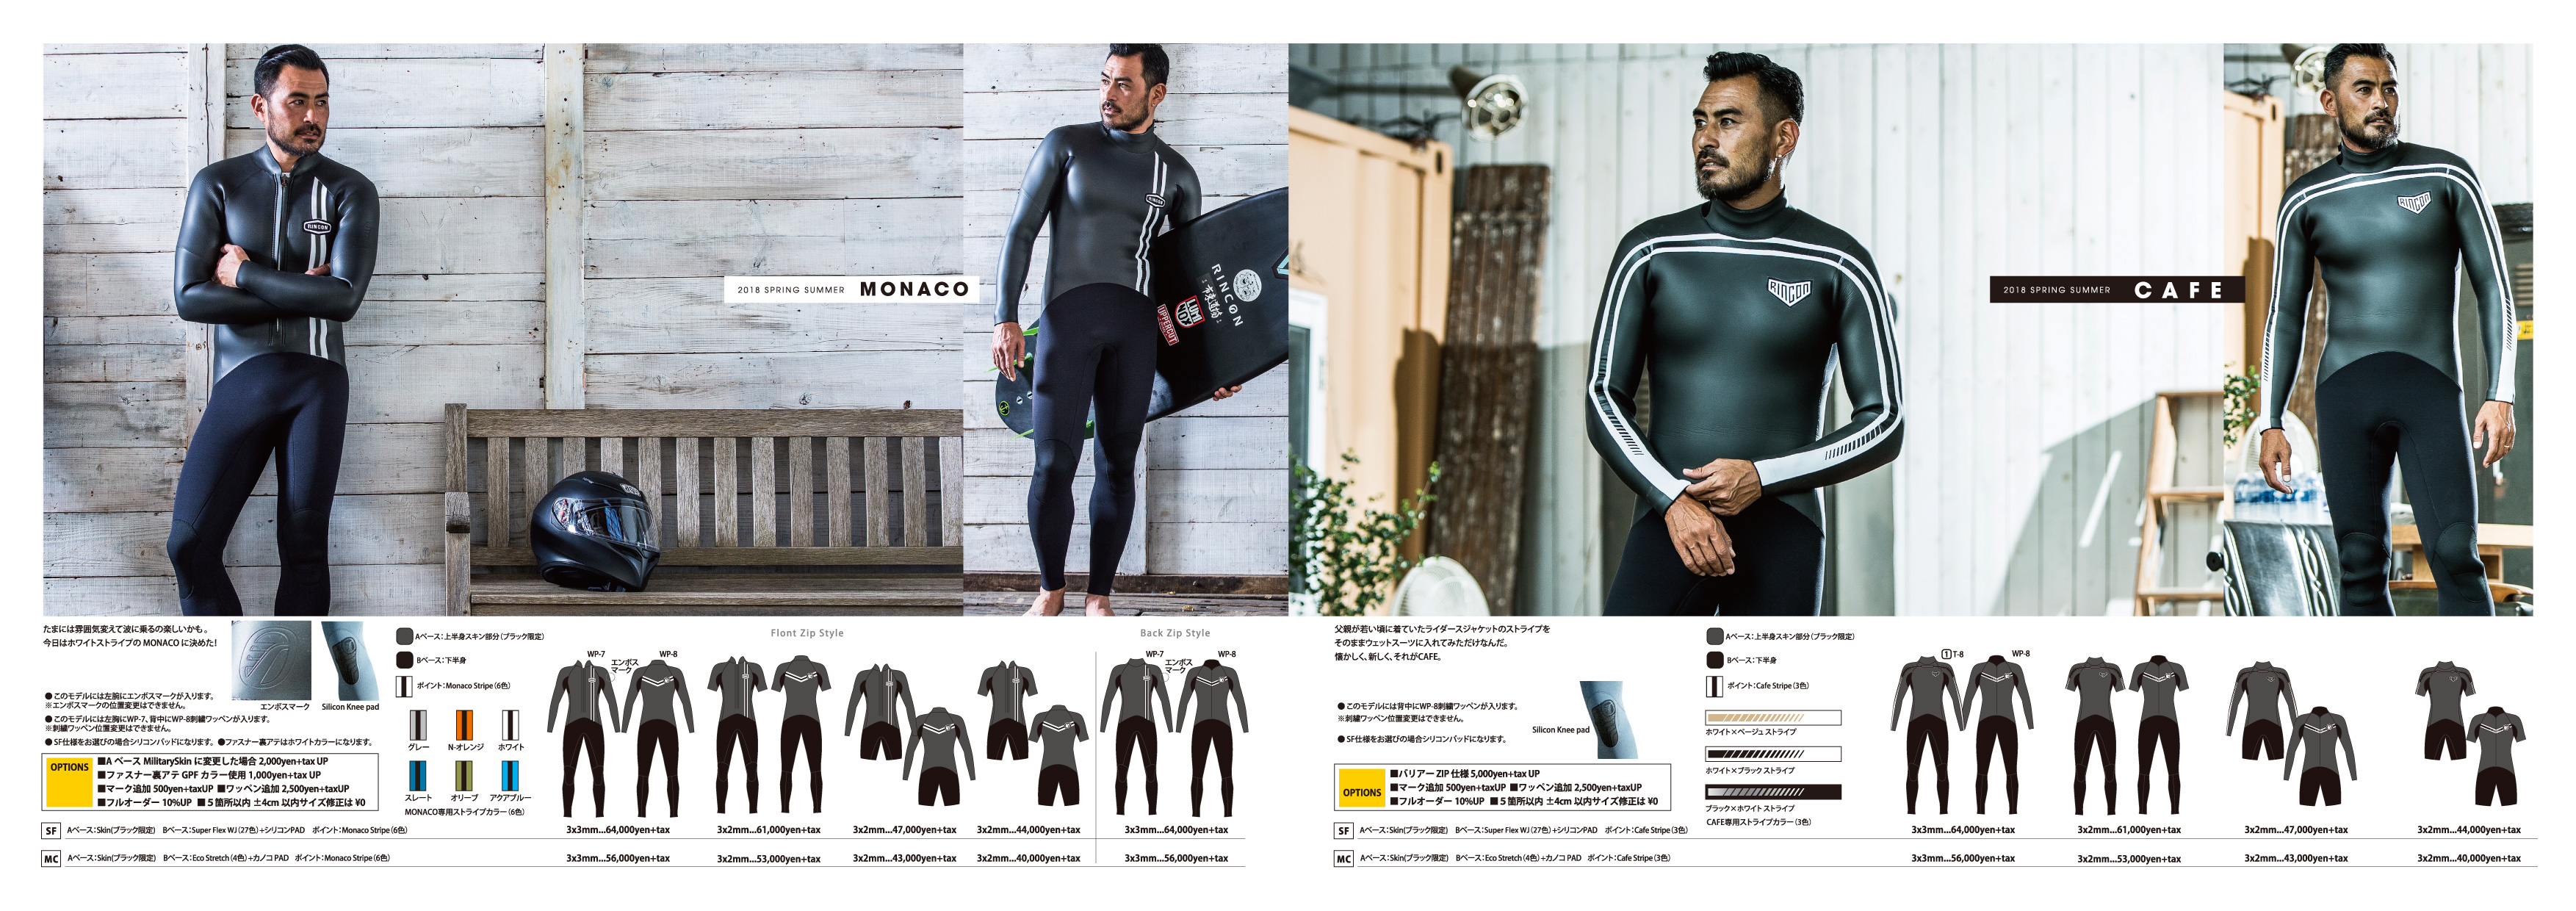 Rincon_Wetsuits